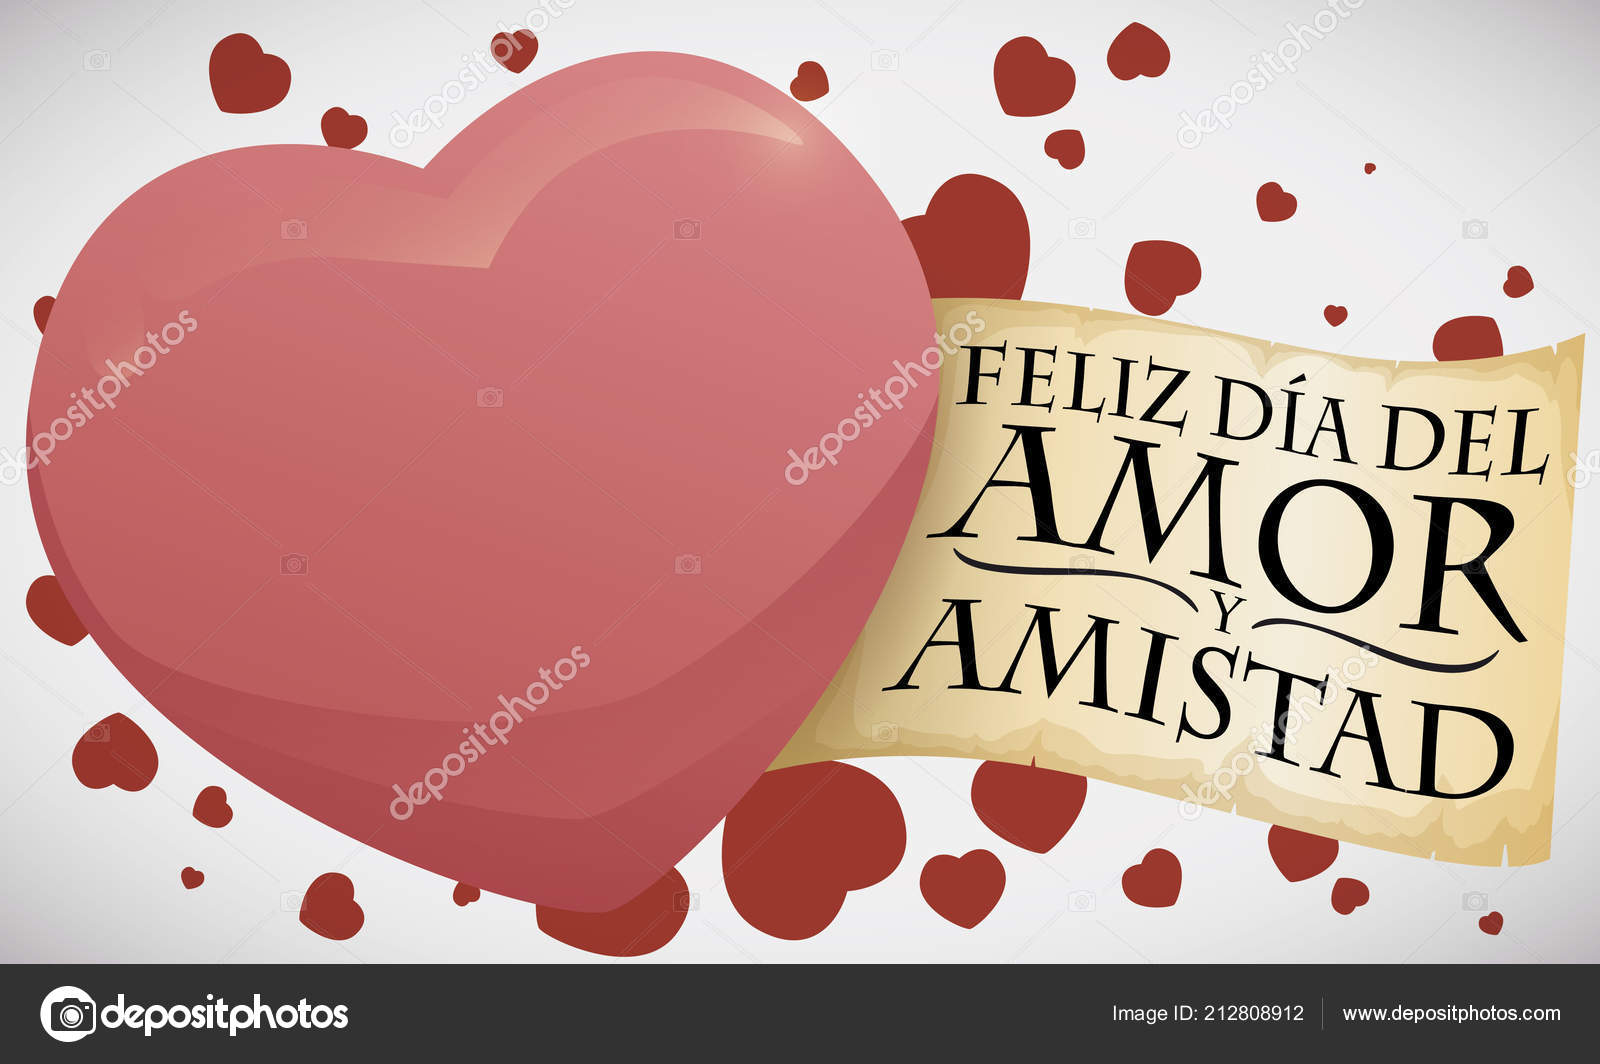 Pictures De Amor Y Amistad Heart Tiny Hearts Floating Greeting